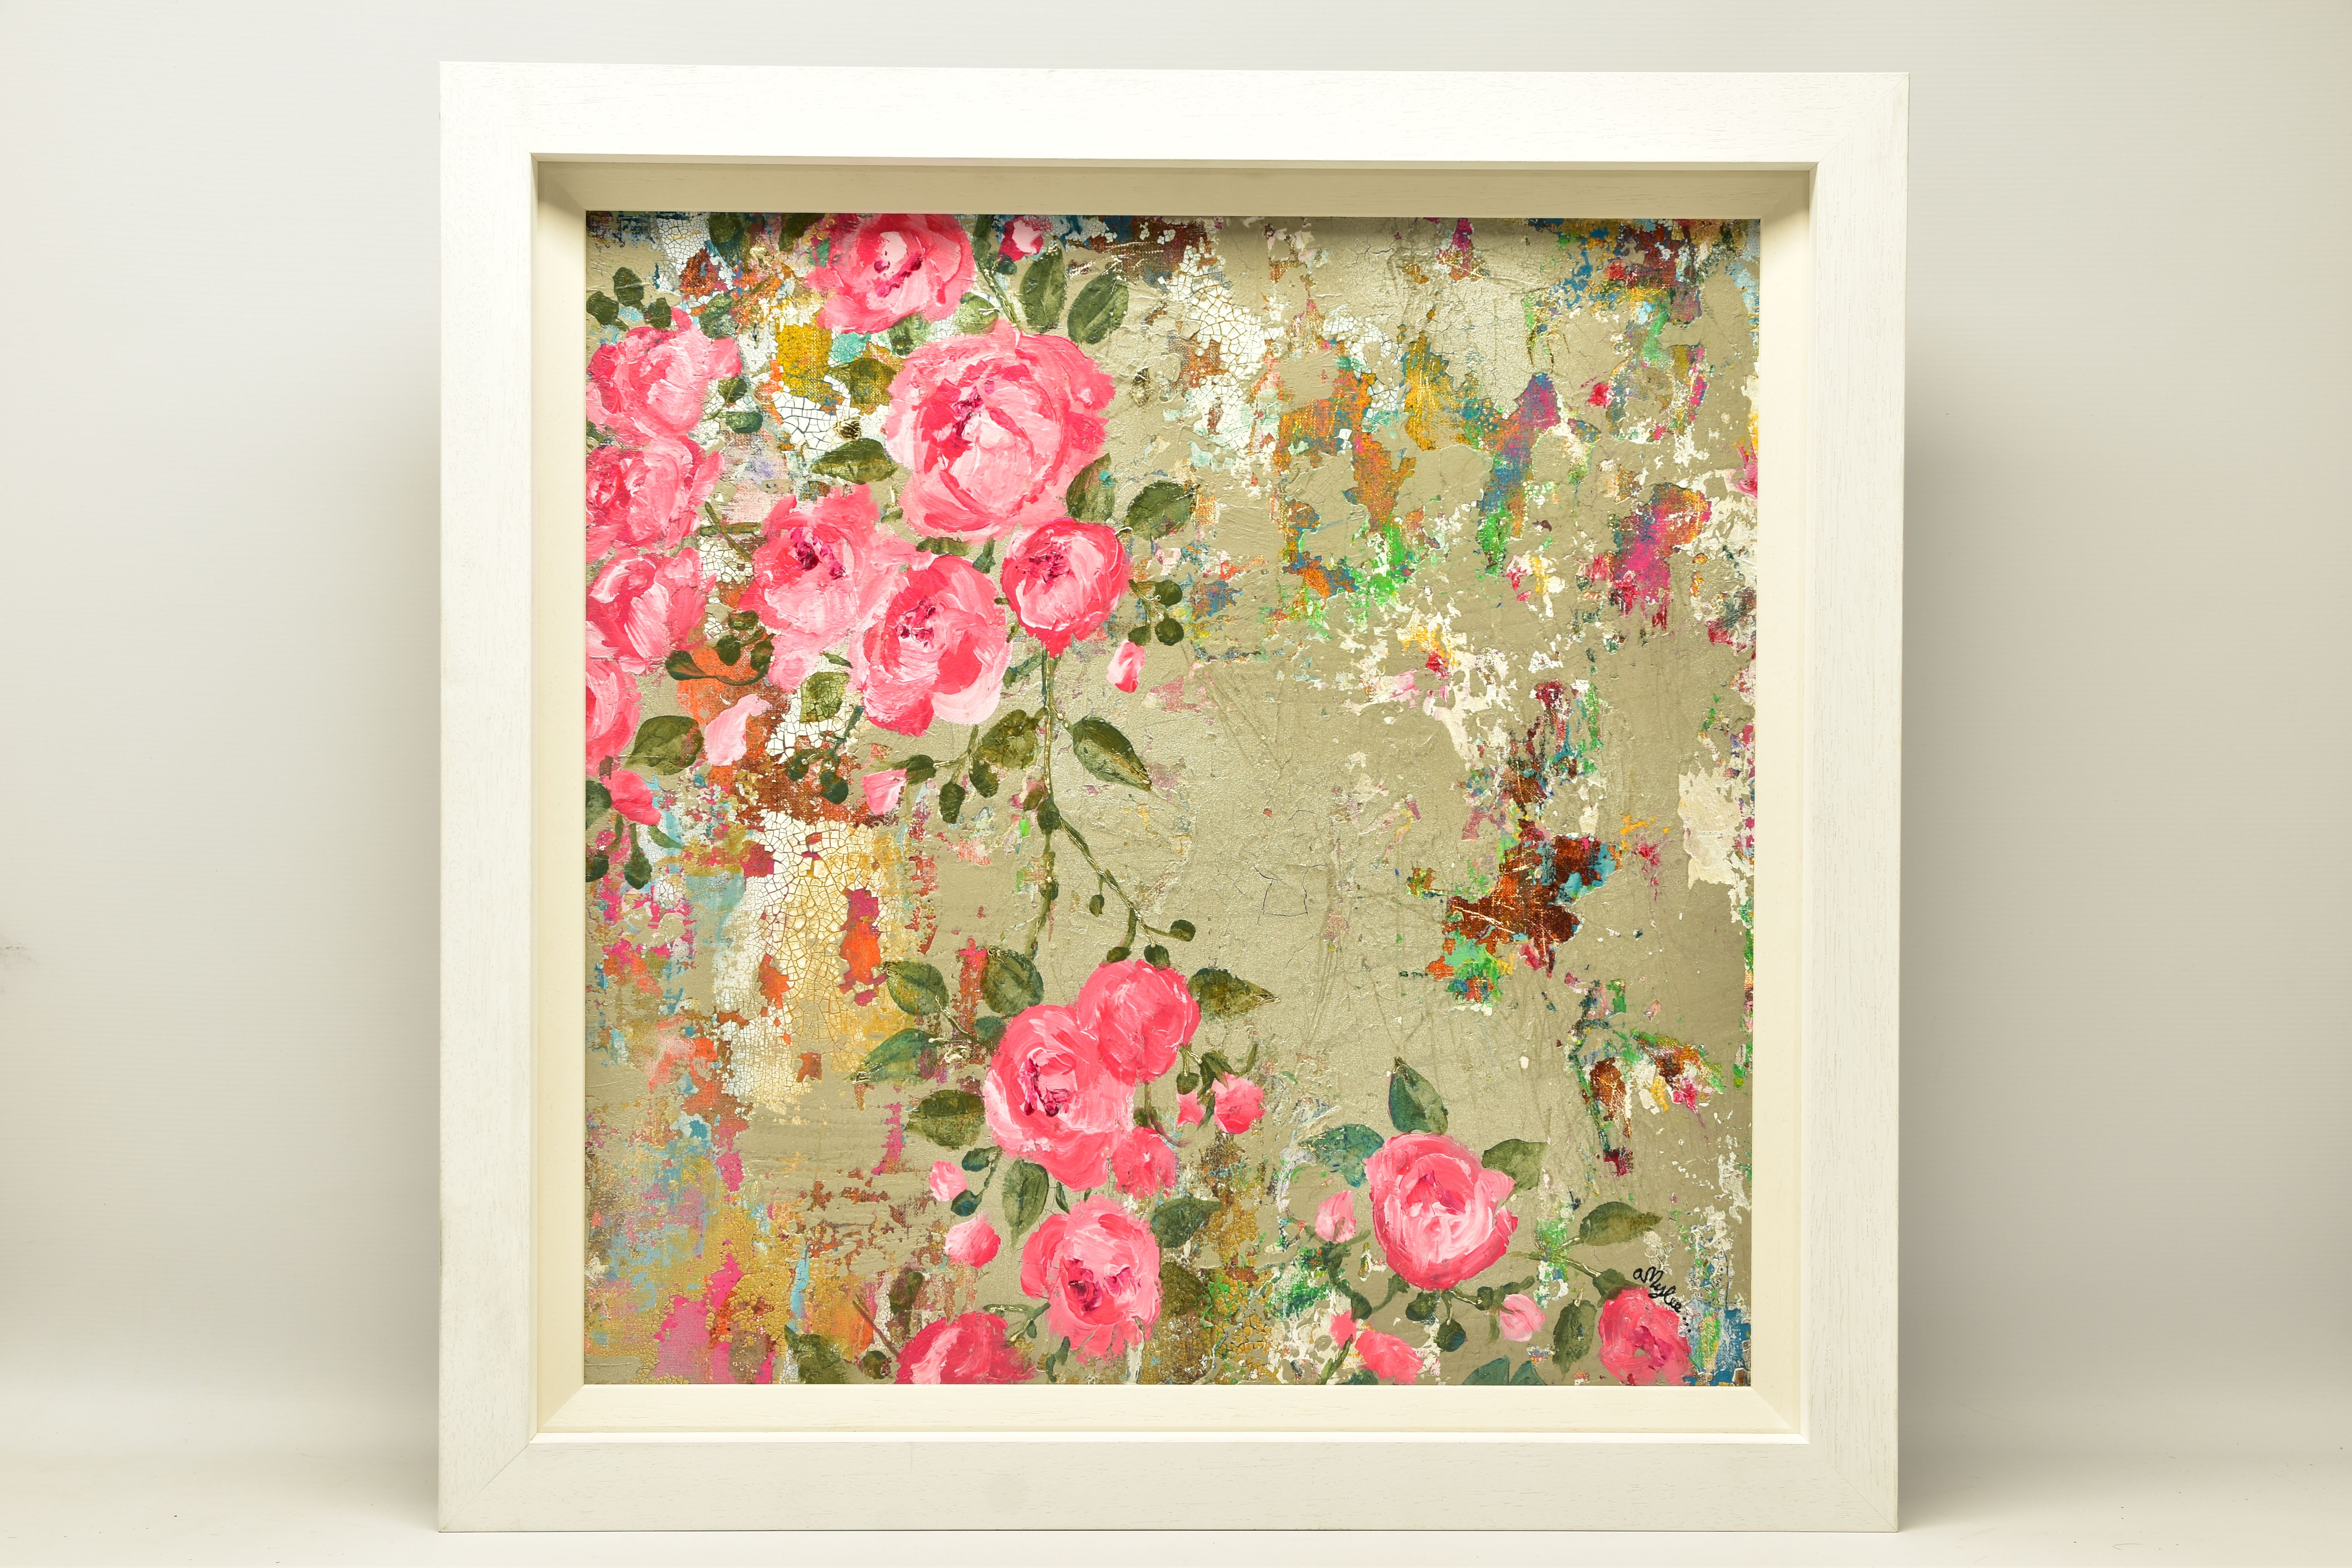 AMYLEE PARIS (FRANCE 1978) 'ONCE UPON A TIME', a study of pink roses against a distressed